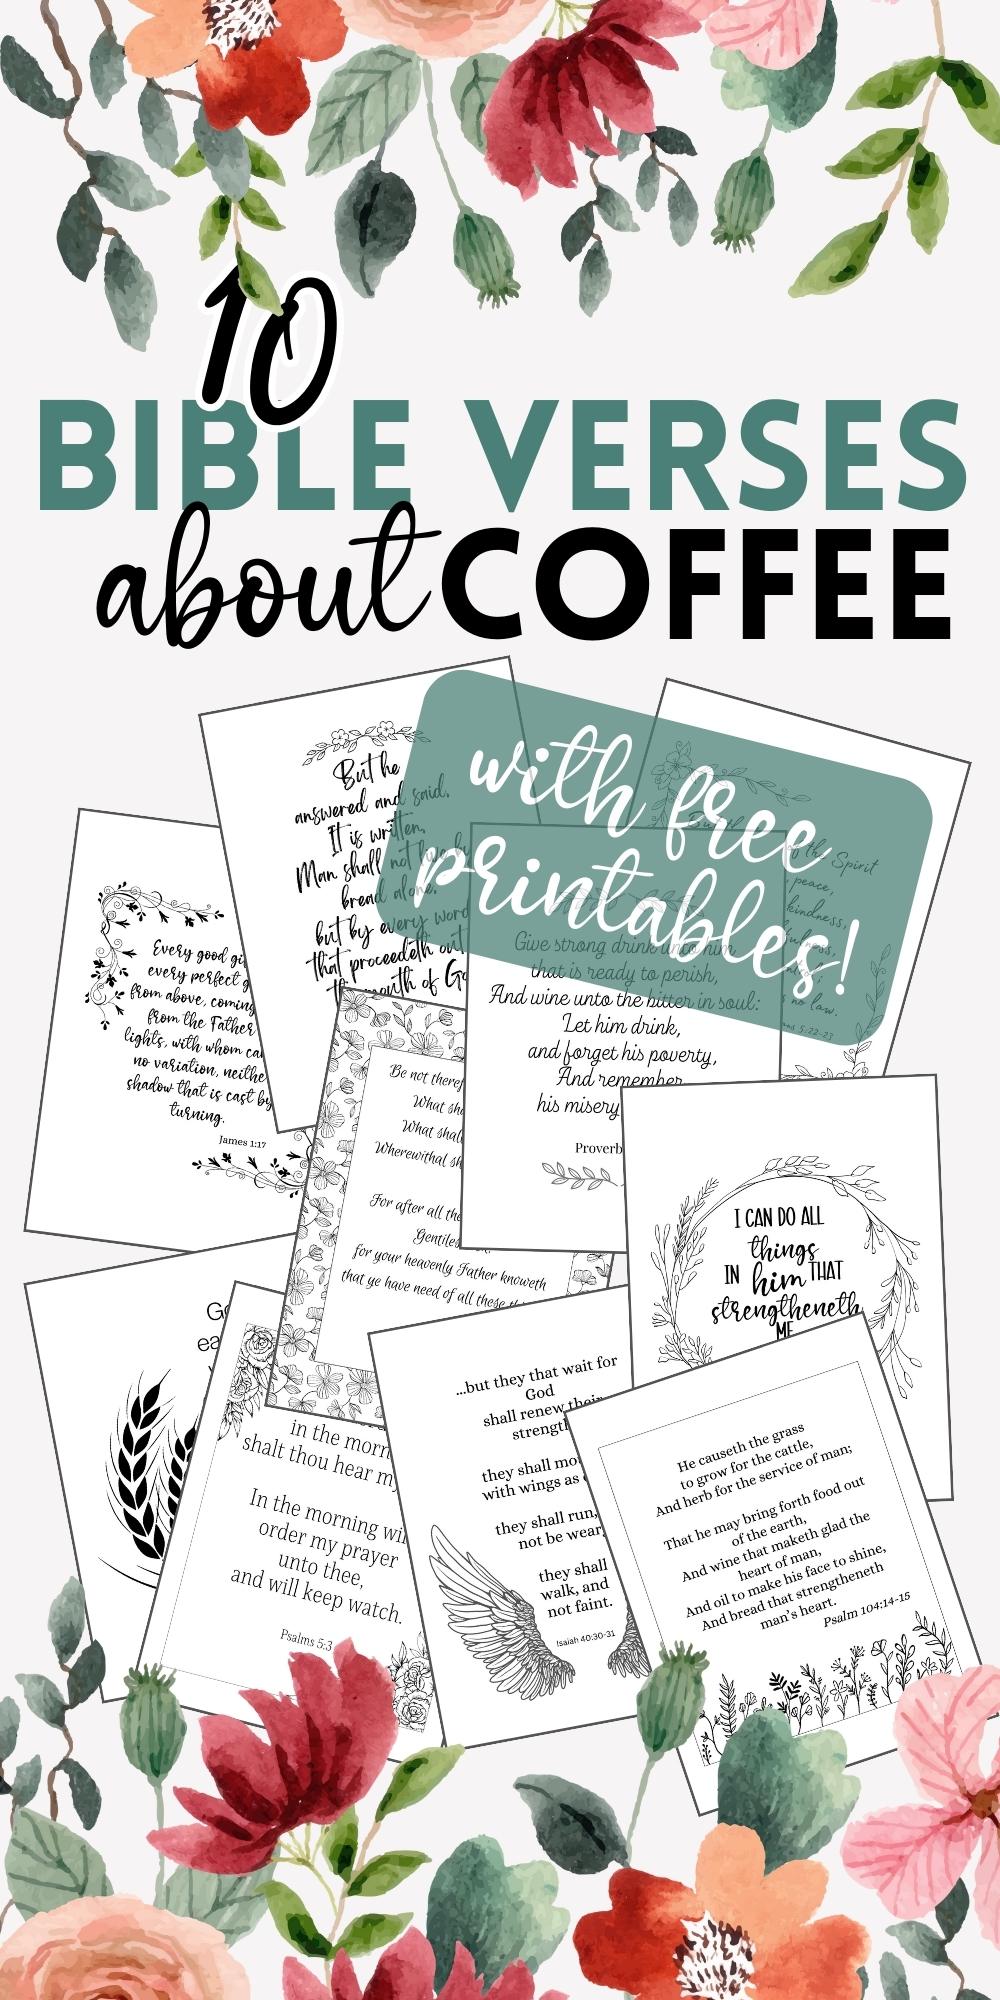 Image of snapshots of printable images with text overlay for 10 bible verses about coffee.